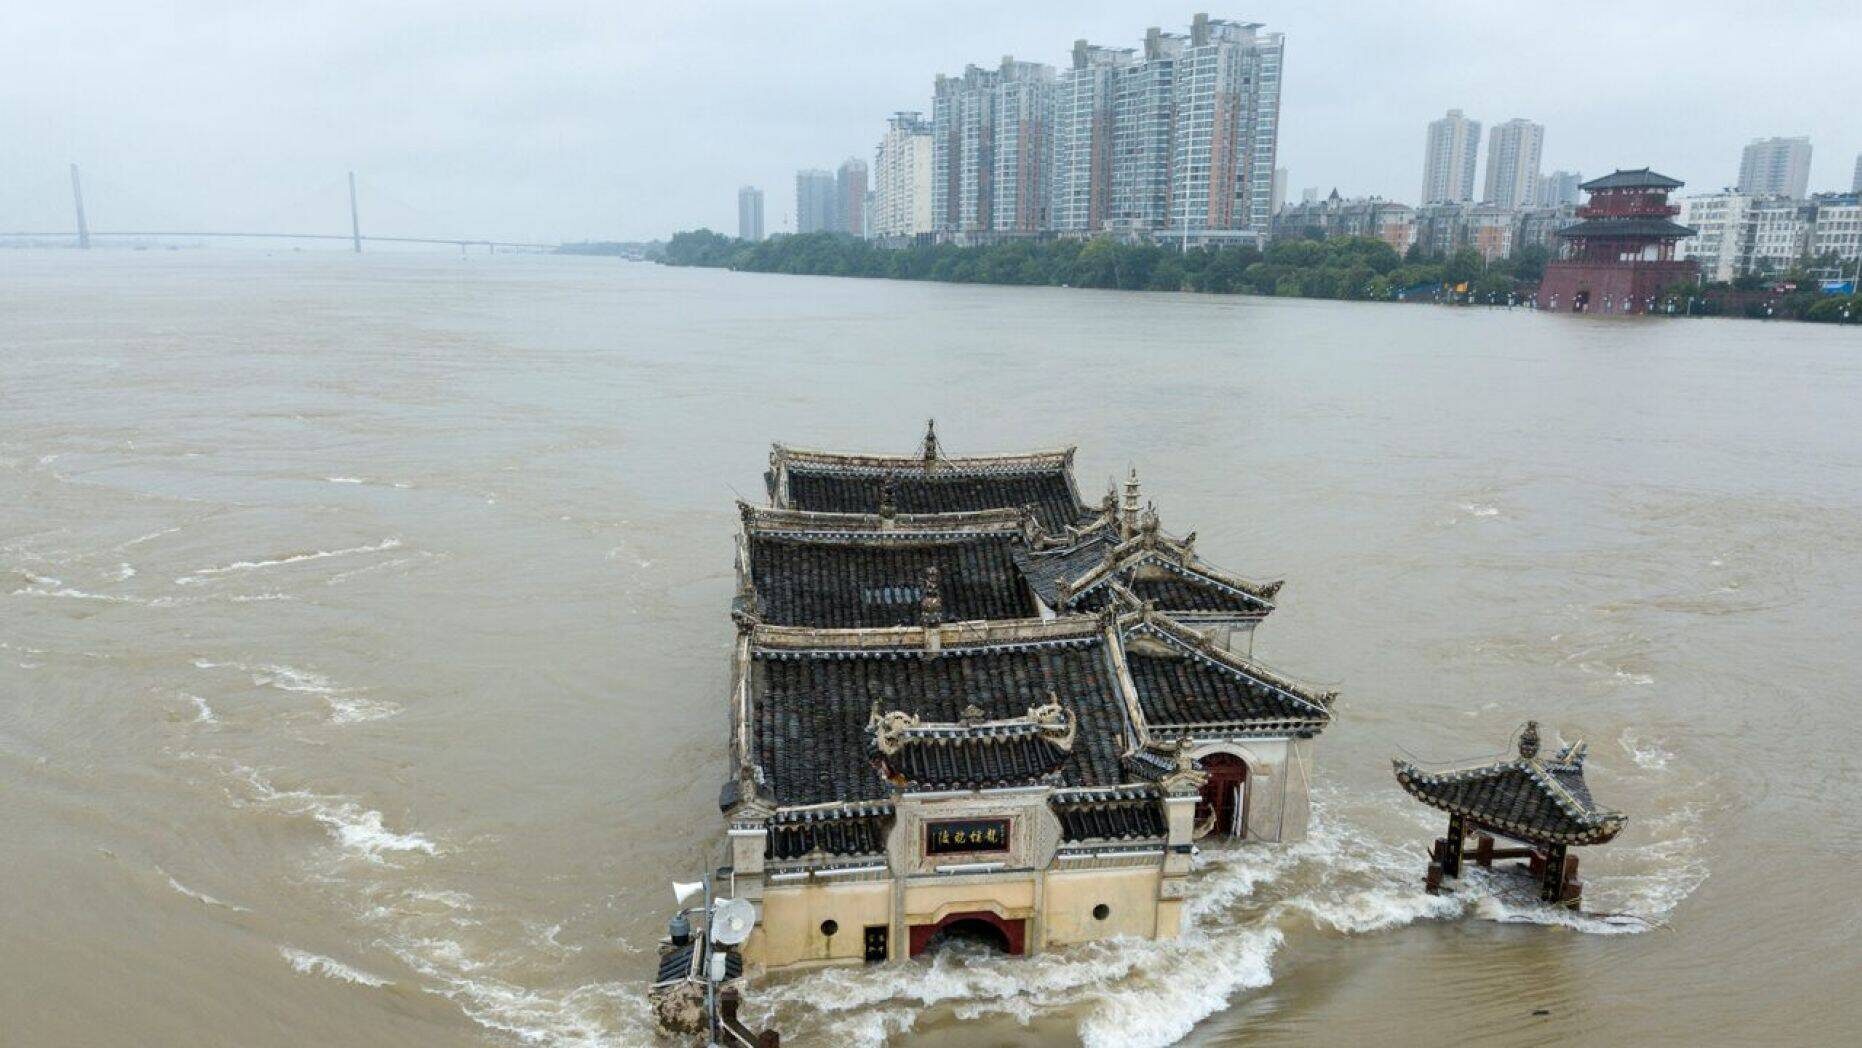 The Kwanyin temple built on a rocky island in the middle of the Yangtze River is seen flooded as the water level surge along Ezhou in central China's Hubei province